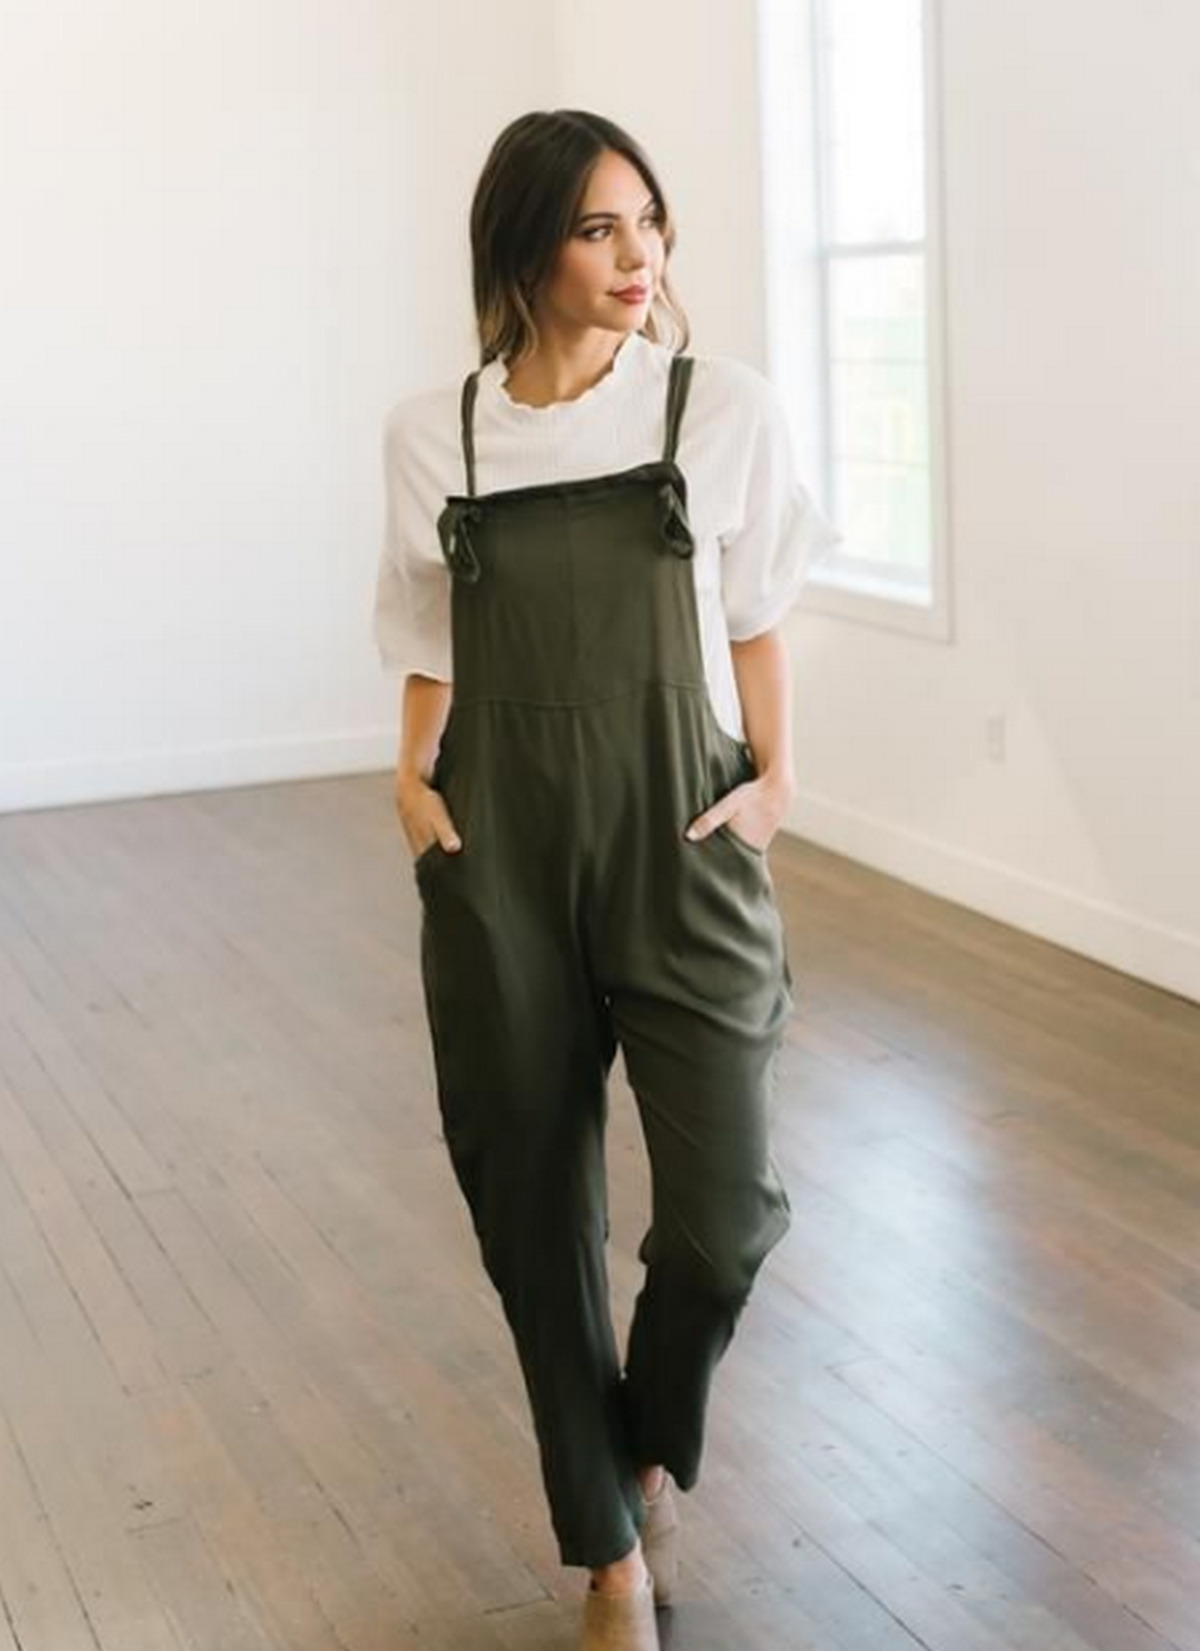 A White T-Shirt With Seaweed Green Overalls